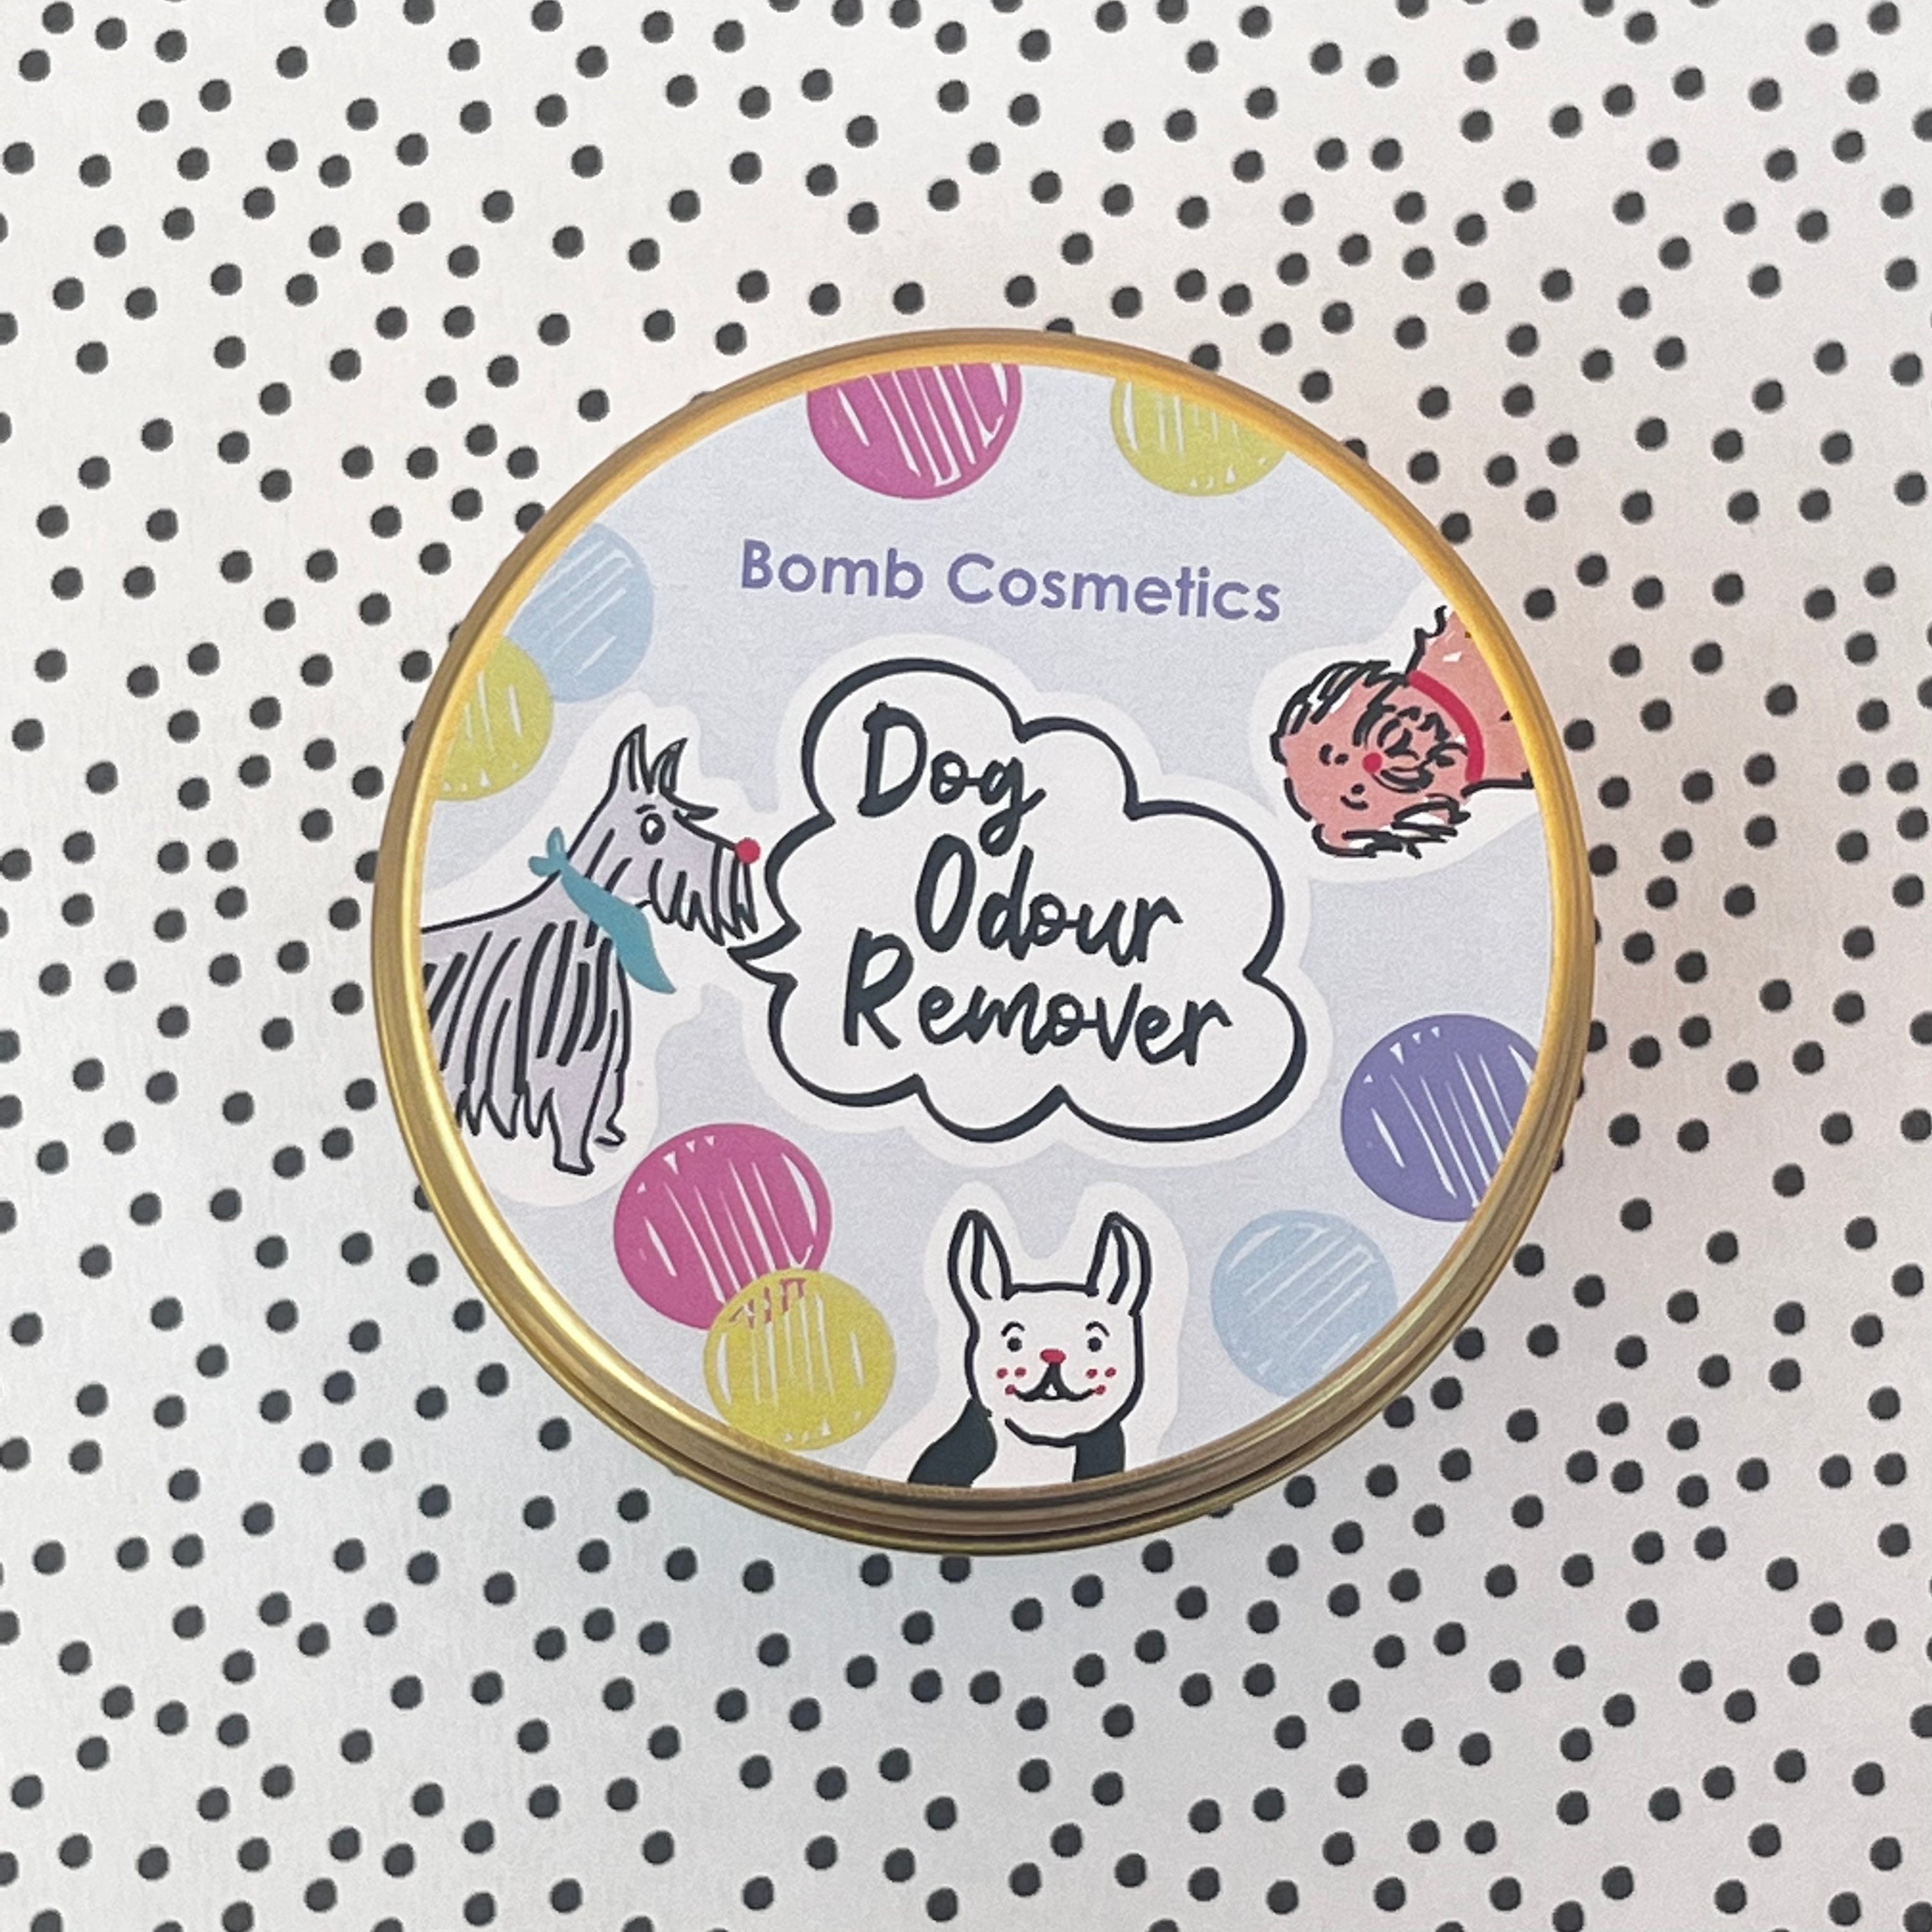 Bomb Cosmetics Dog Odour Remover Candle